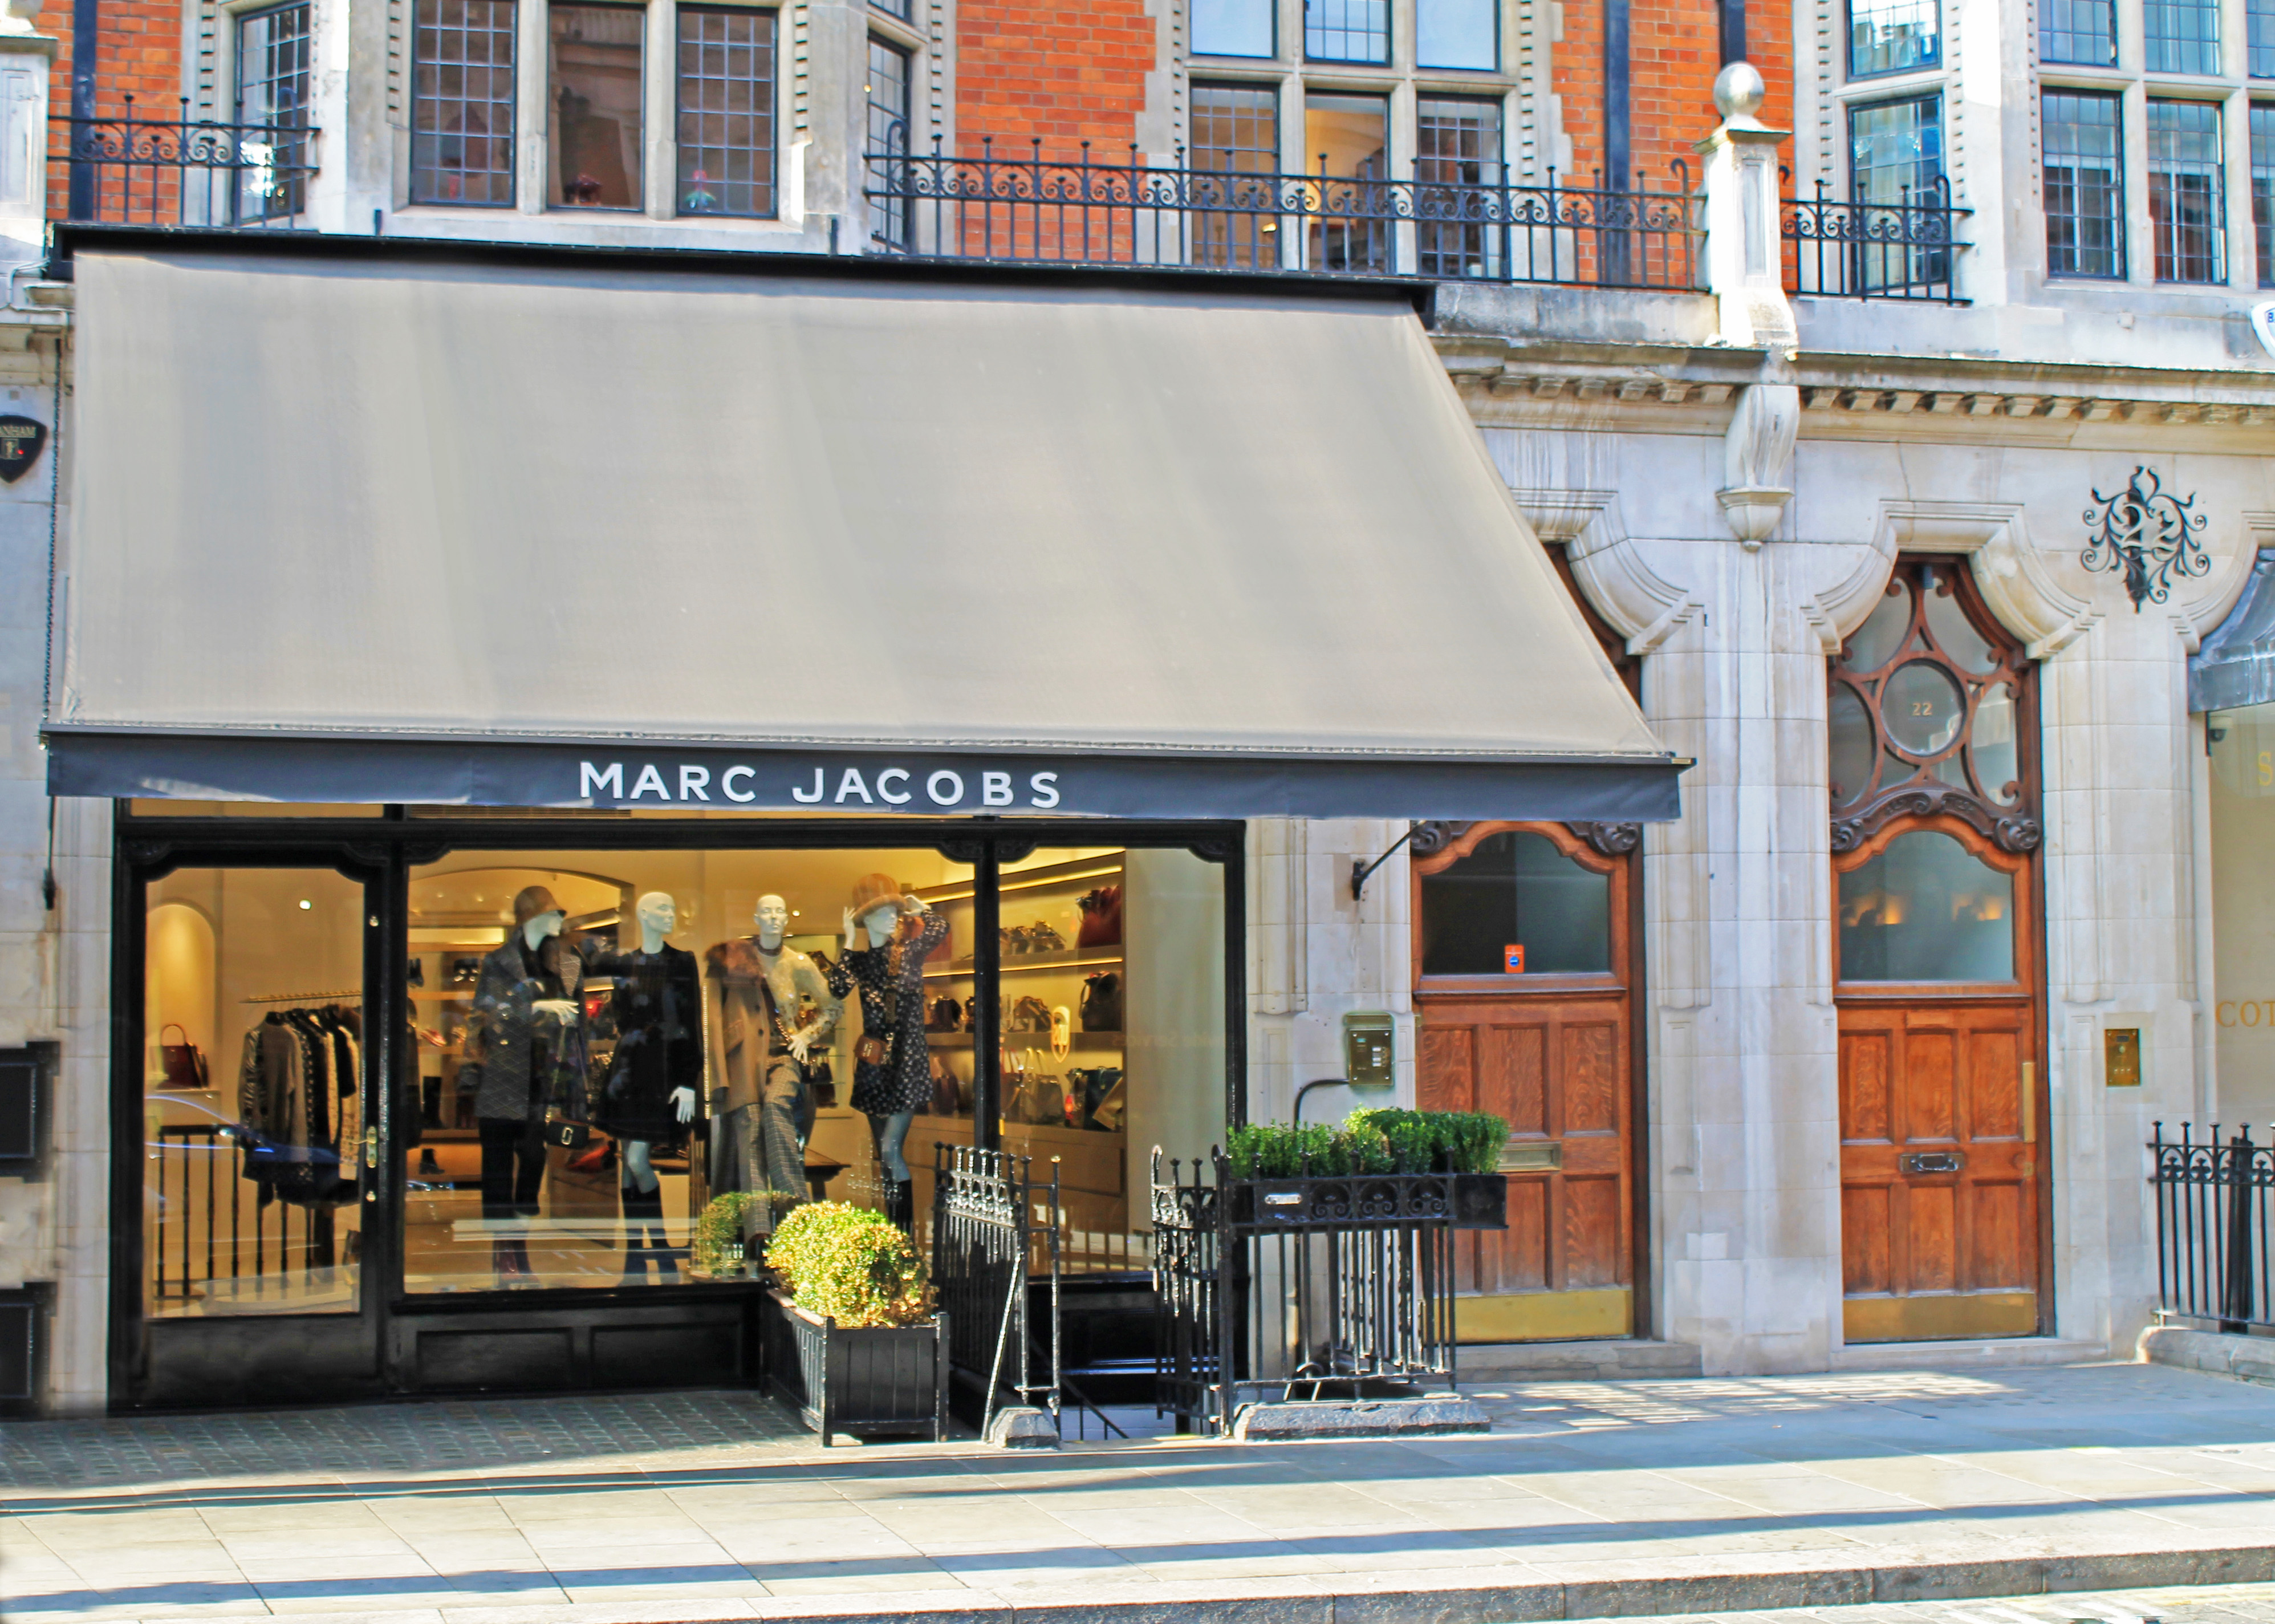 Marc Jacobs Mount street awning